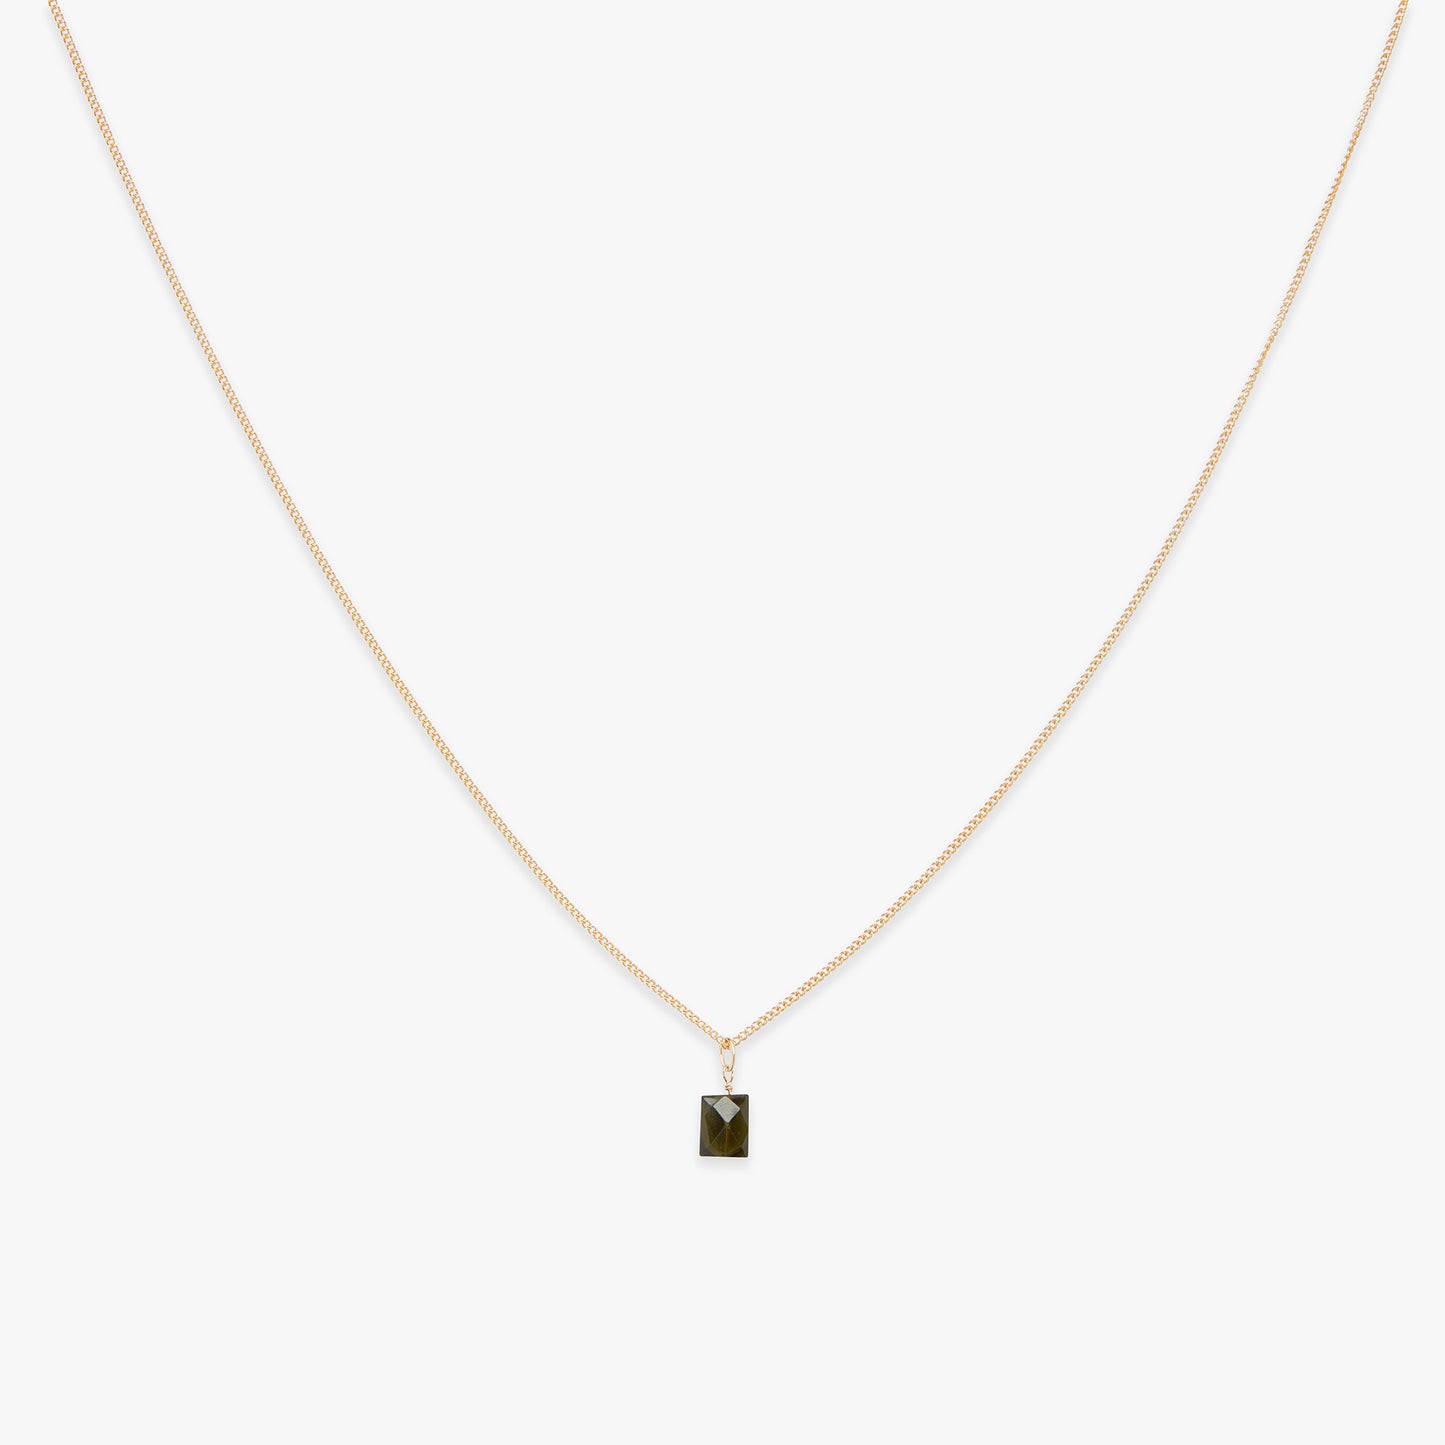 Laad afbeelding in Galerijviewer, Minimal Janny ketting gold filled
